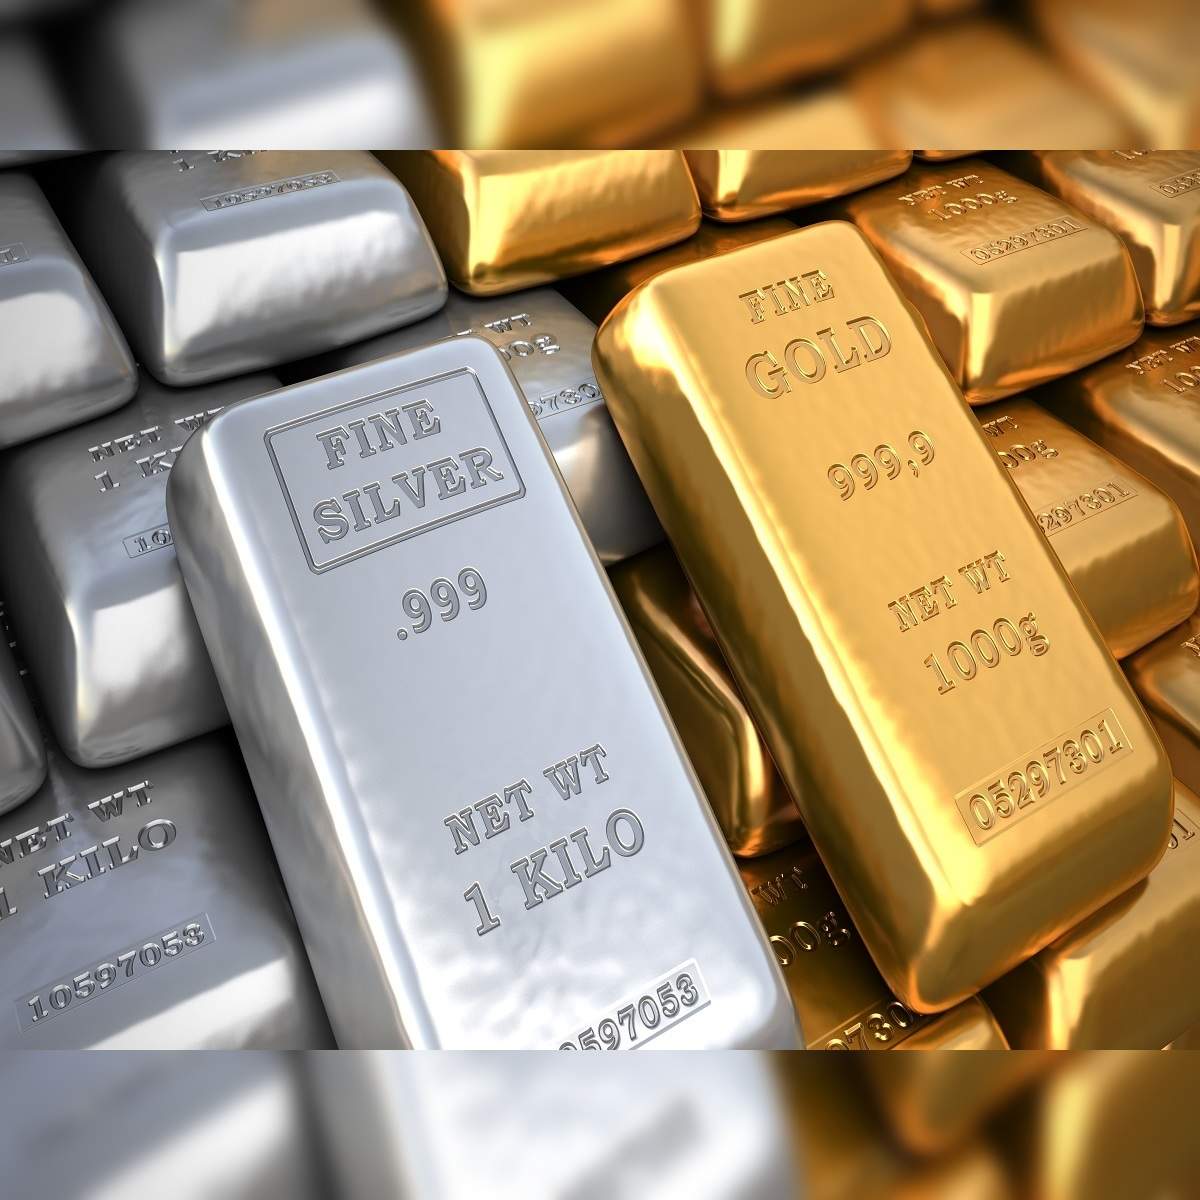 silver investment: Is silver the new gold? Key triggers to watch